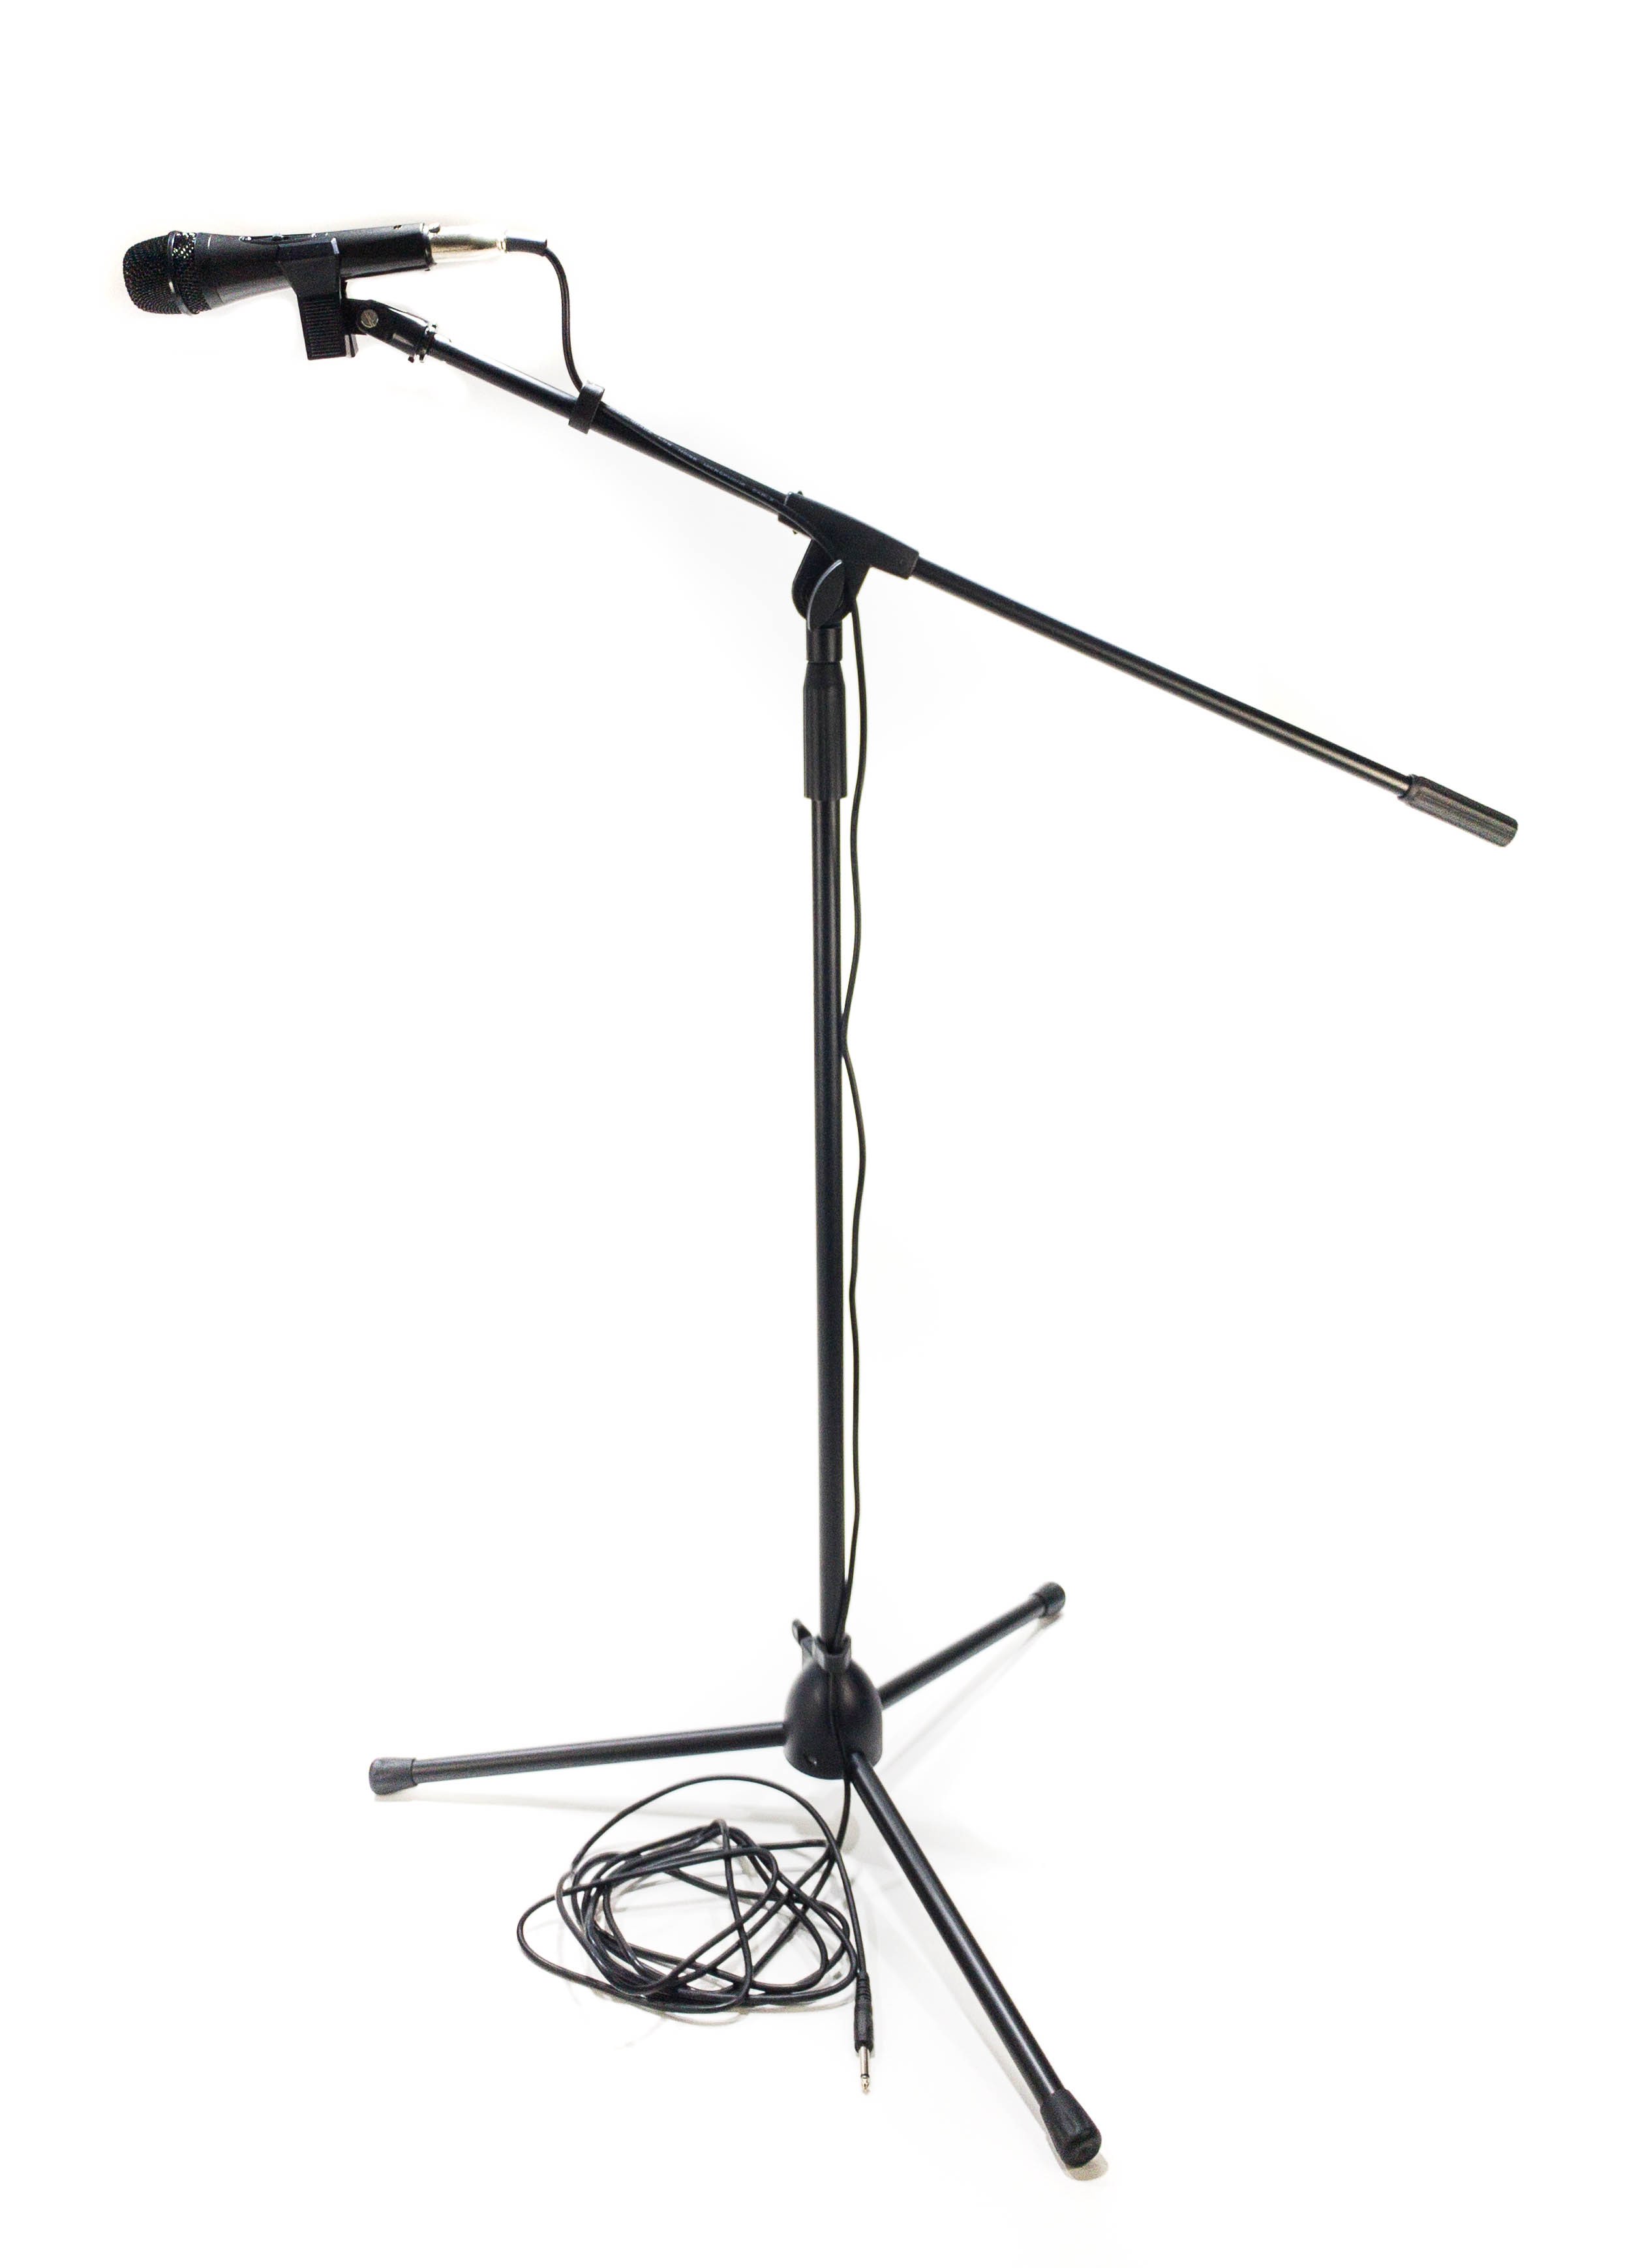 Complete Microphone Set